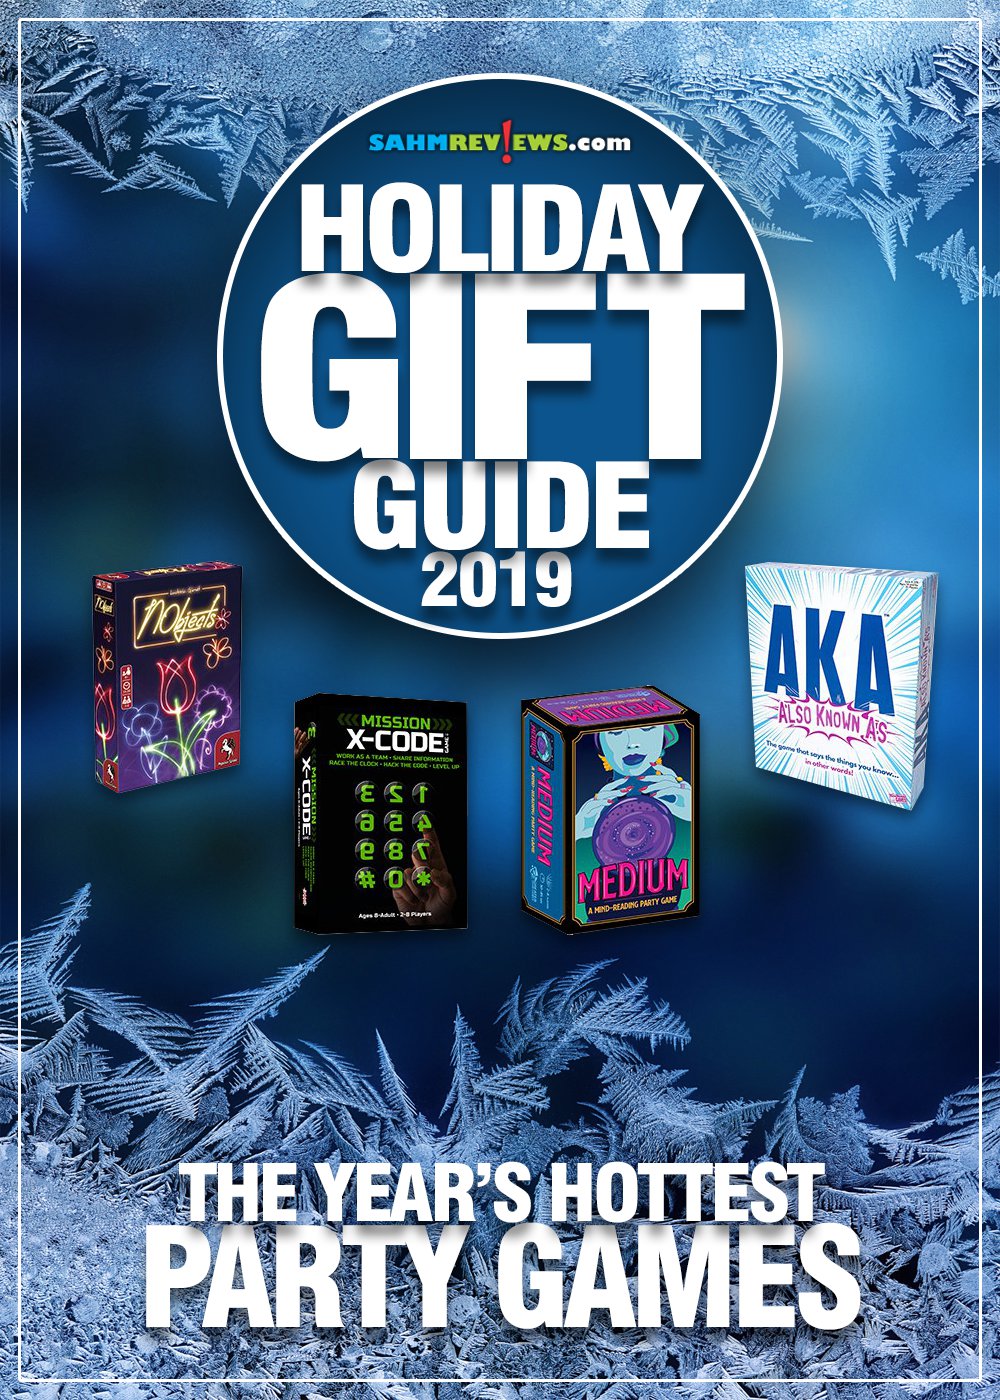 Need to support six players (or more) on your next board game night? These holiday gift ideas will keep everyone in the same game and no one left out!